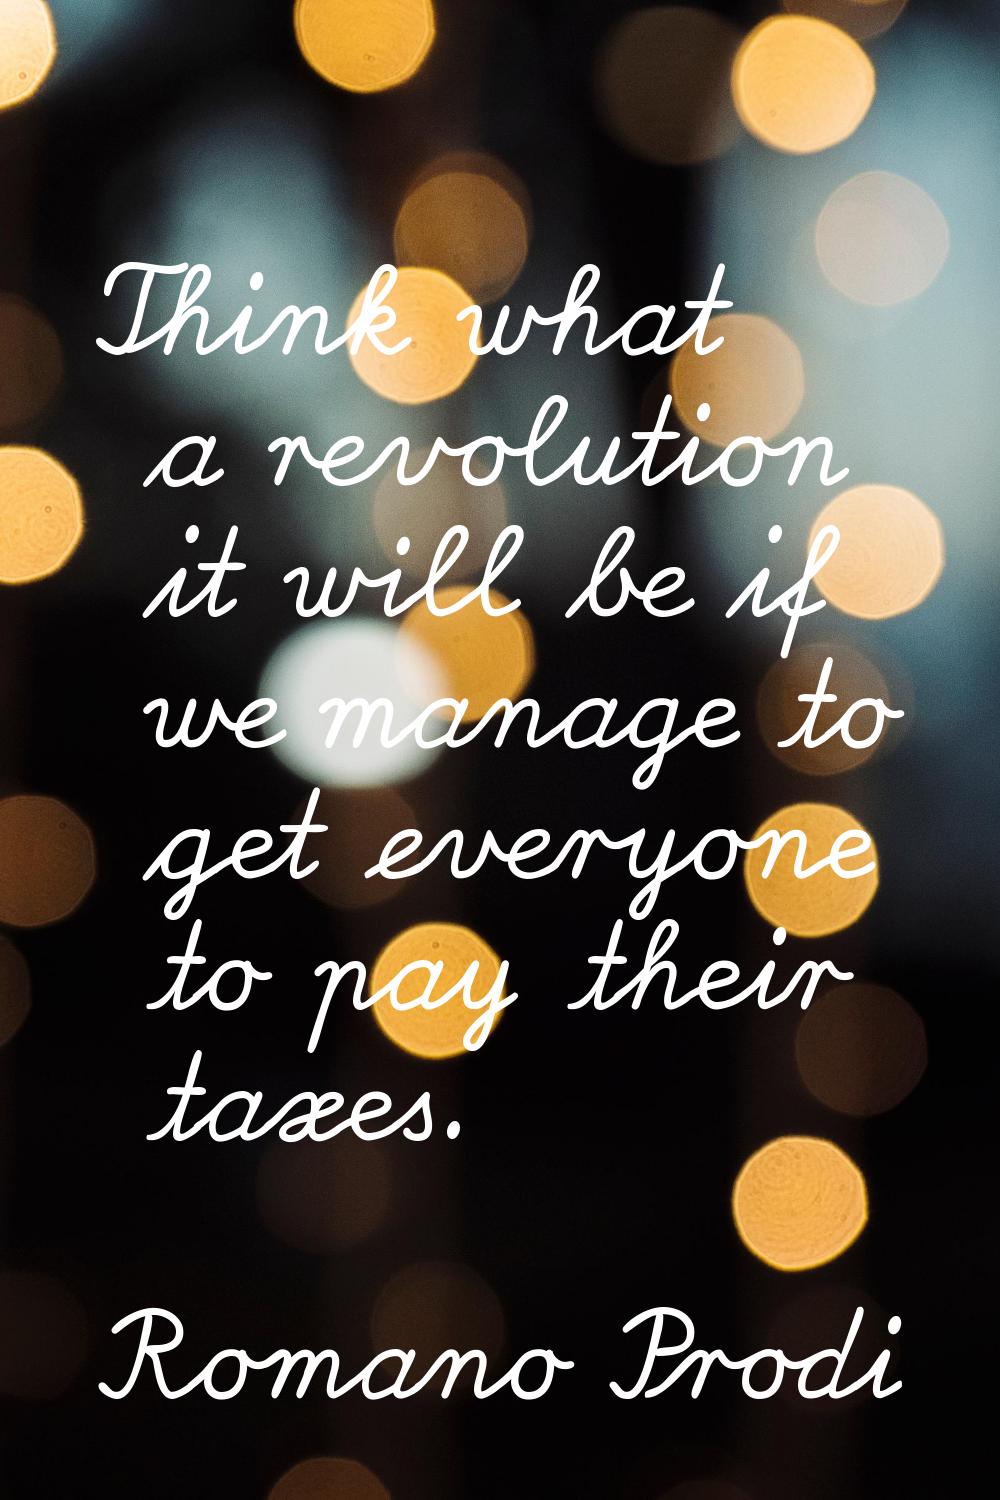 Think what a revolution it will be if we manage to get everyone to pay their taxes.